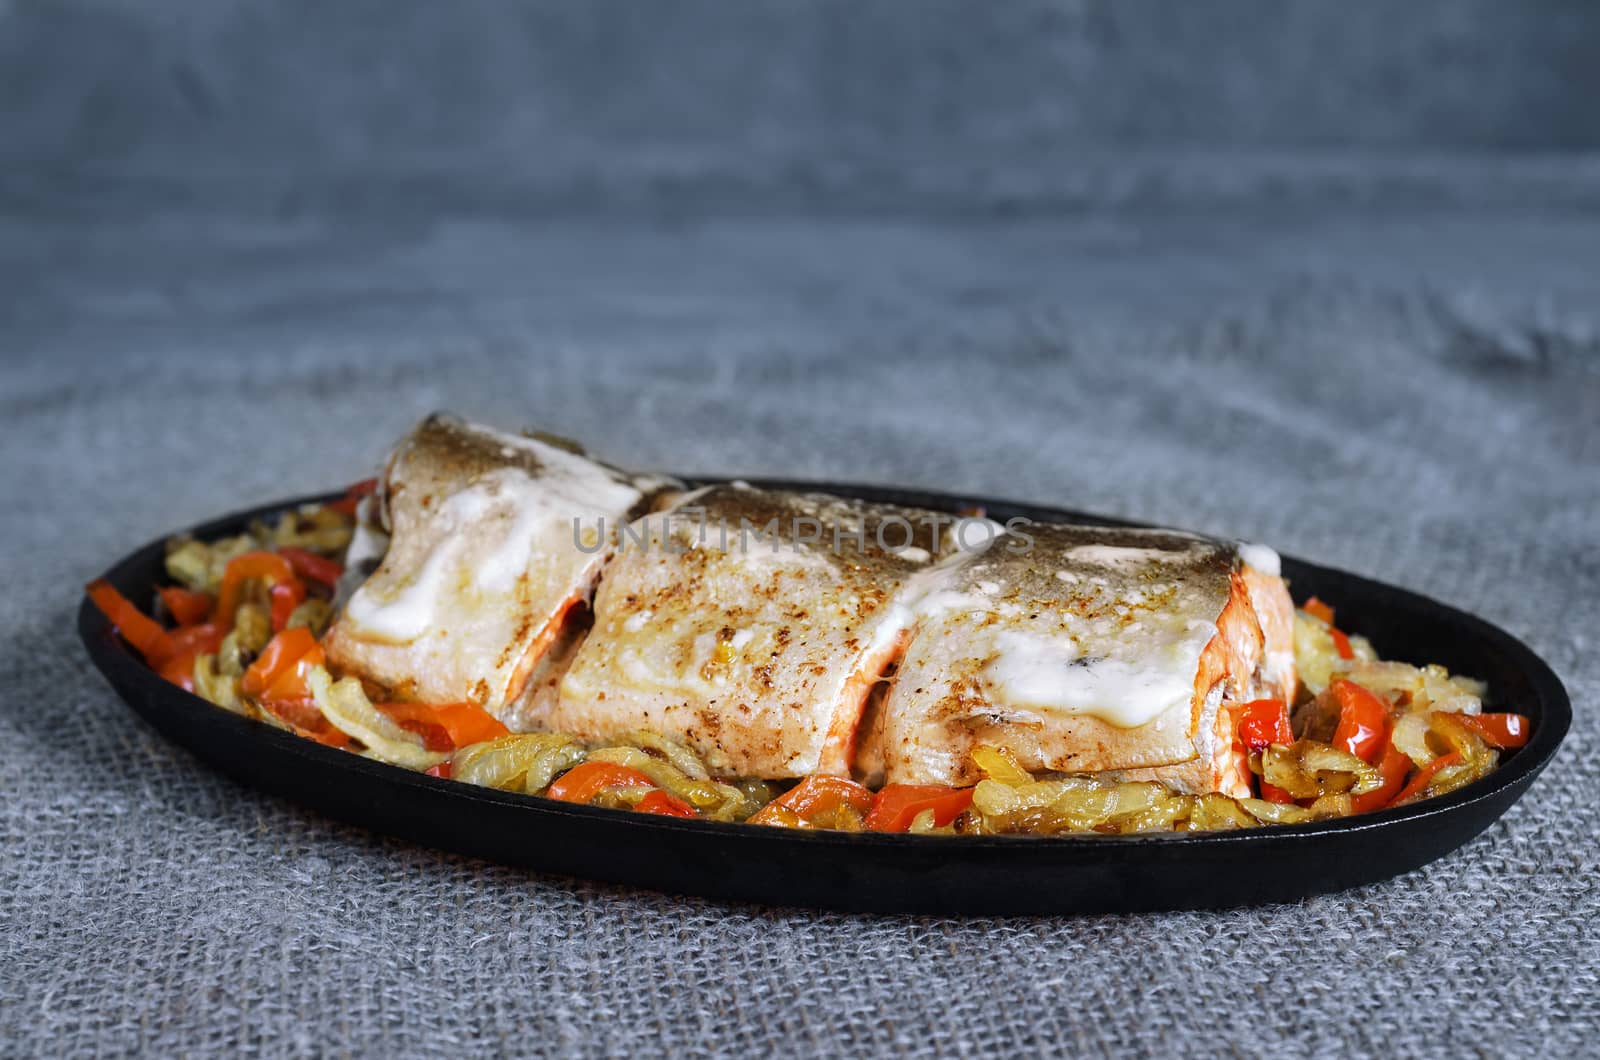 Salmon baked in mayonnaise with vegetables in a cast iron skillet and a gray-blue background. Rustic style